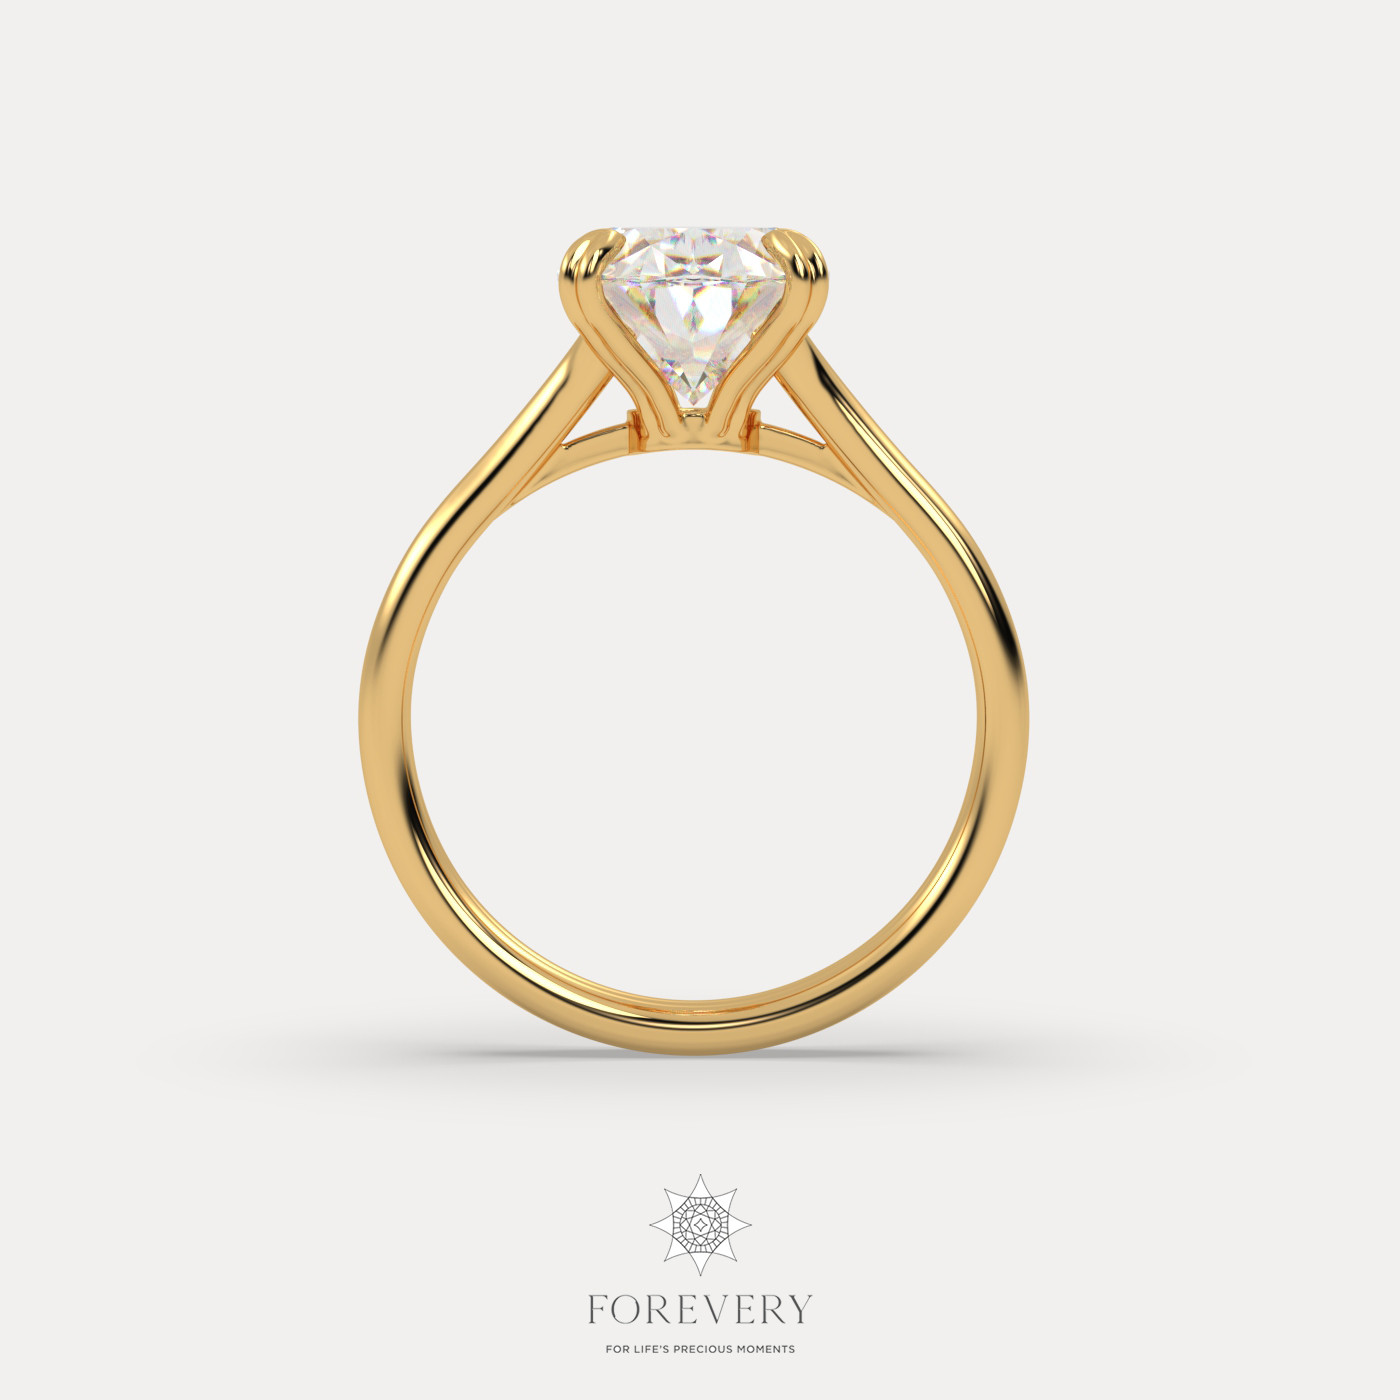 18K YELLOW GOLD Oval Cut Diamond Solitaire Engagament Ring